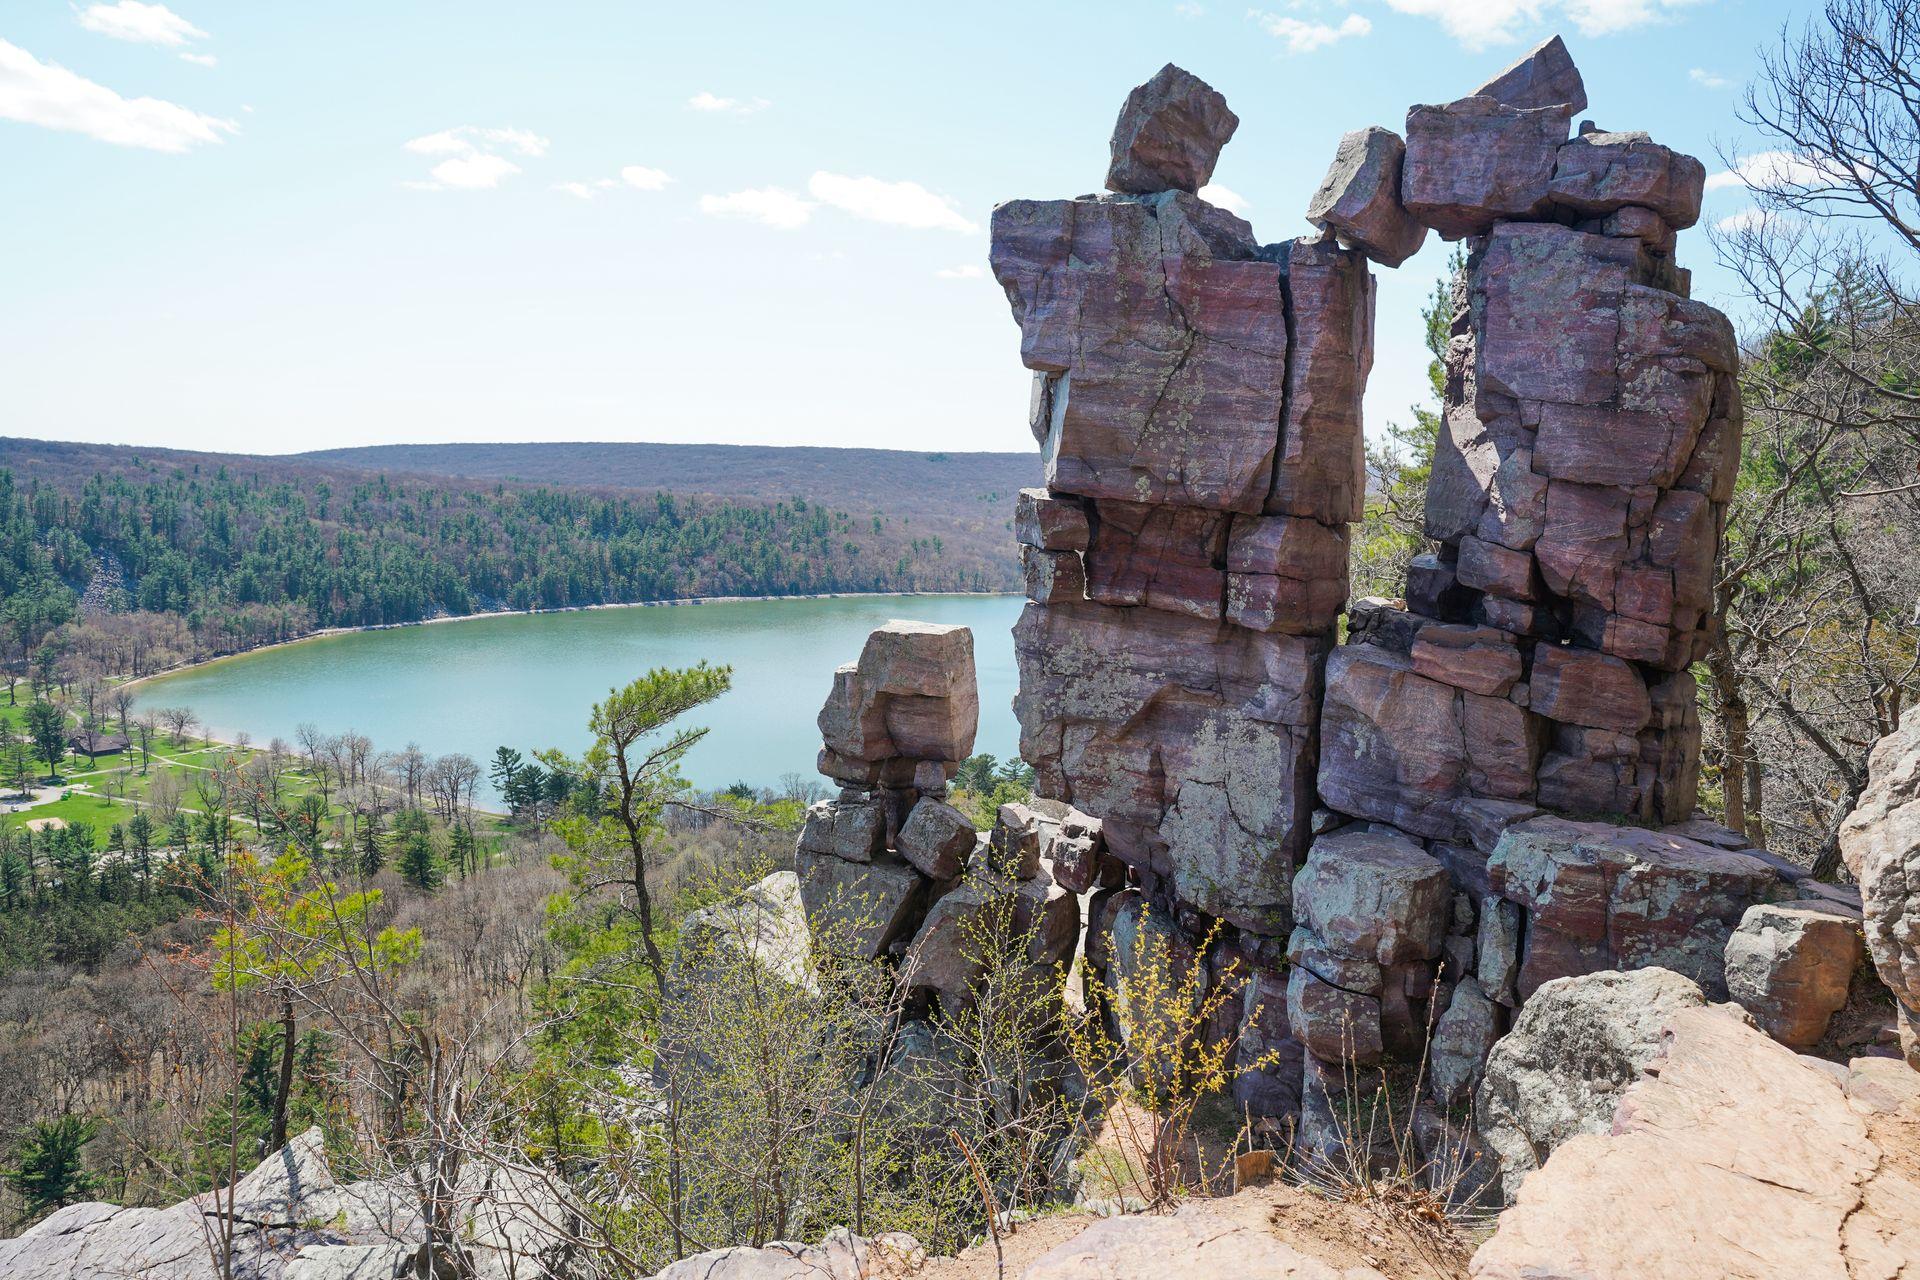 A rock formation that looks as if several rocks have been stacked up to create a doorway. There is a lake in the background.